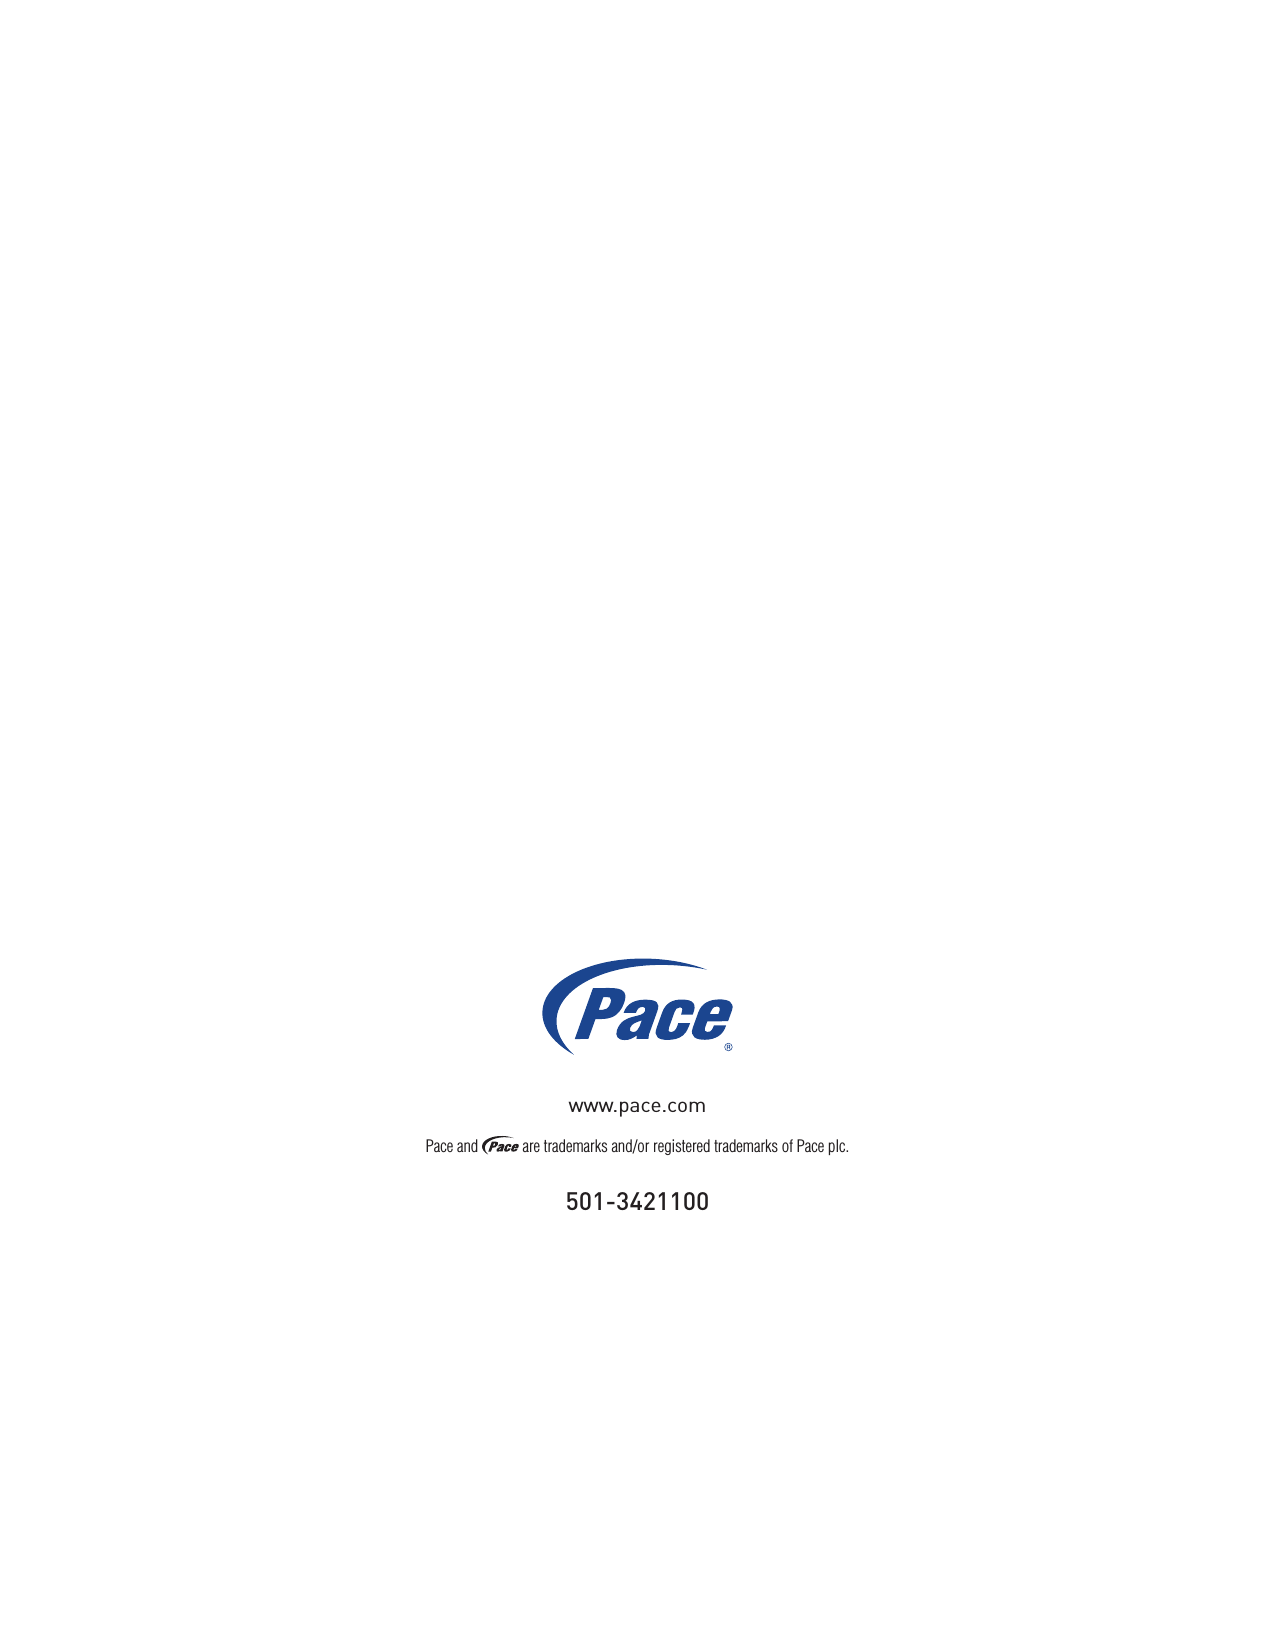 501-3421100Pace and   are trademarks and/or registered trademarks of Pace plc.www.pace.com